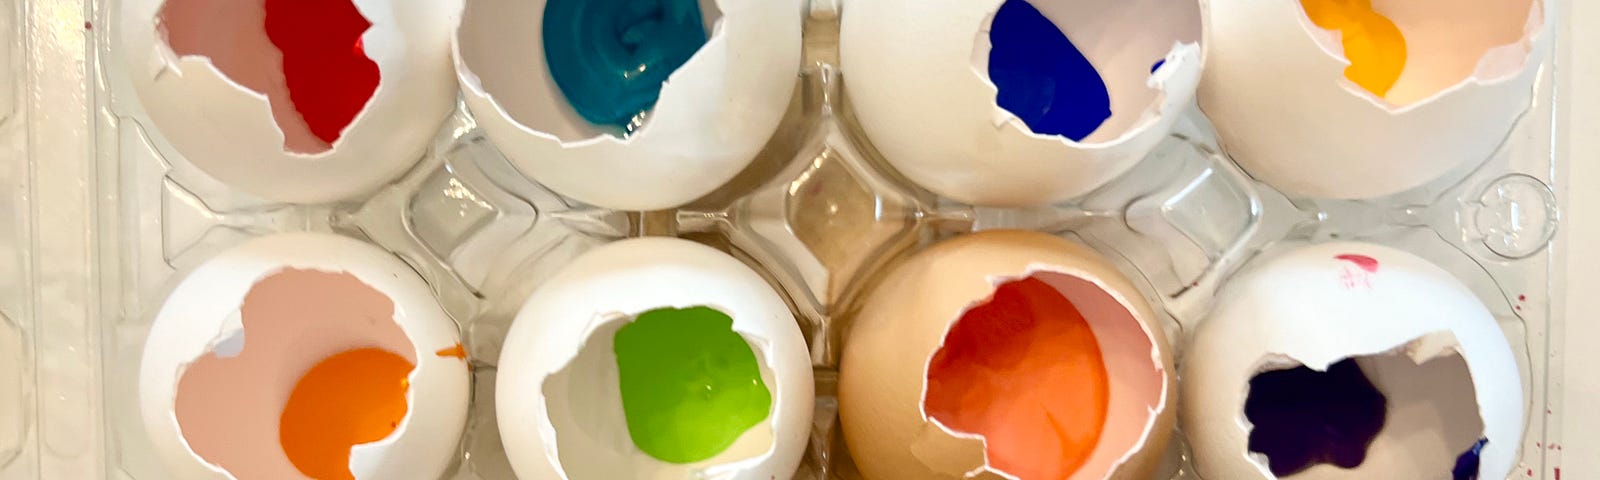 12 eggshells filled with different colored paints